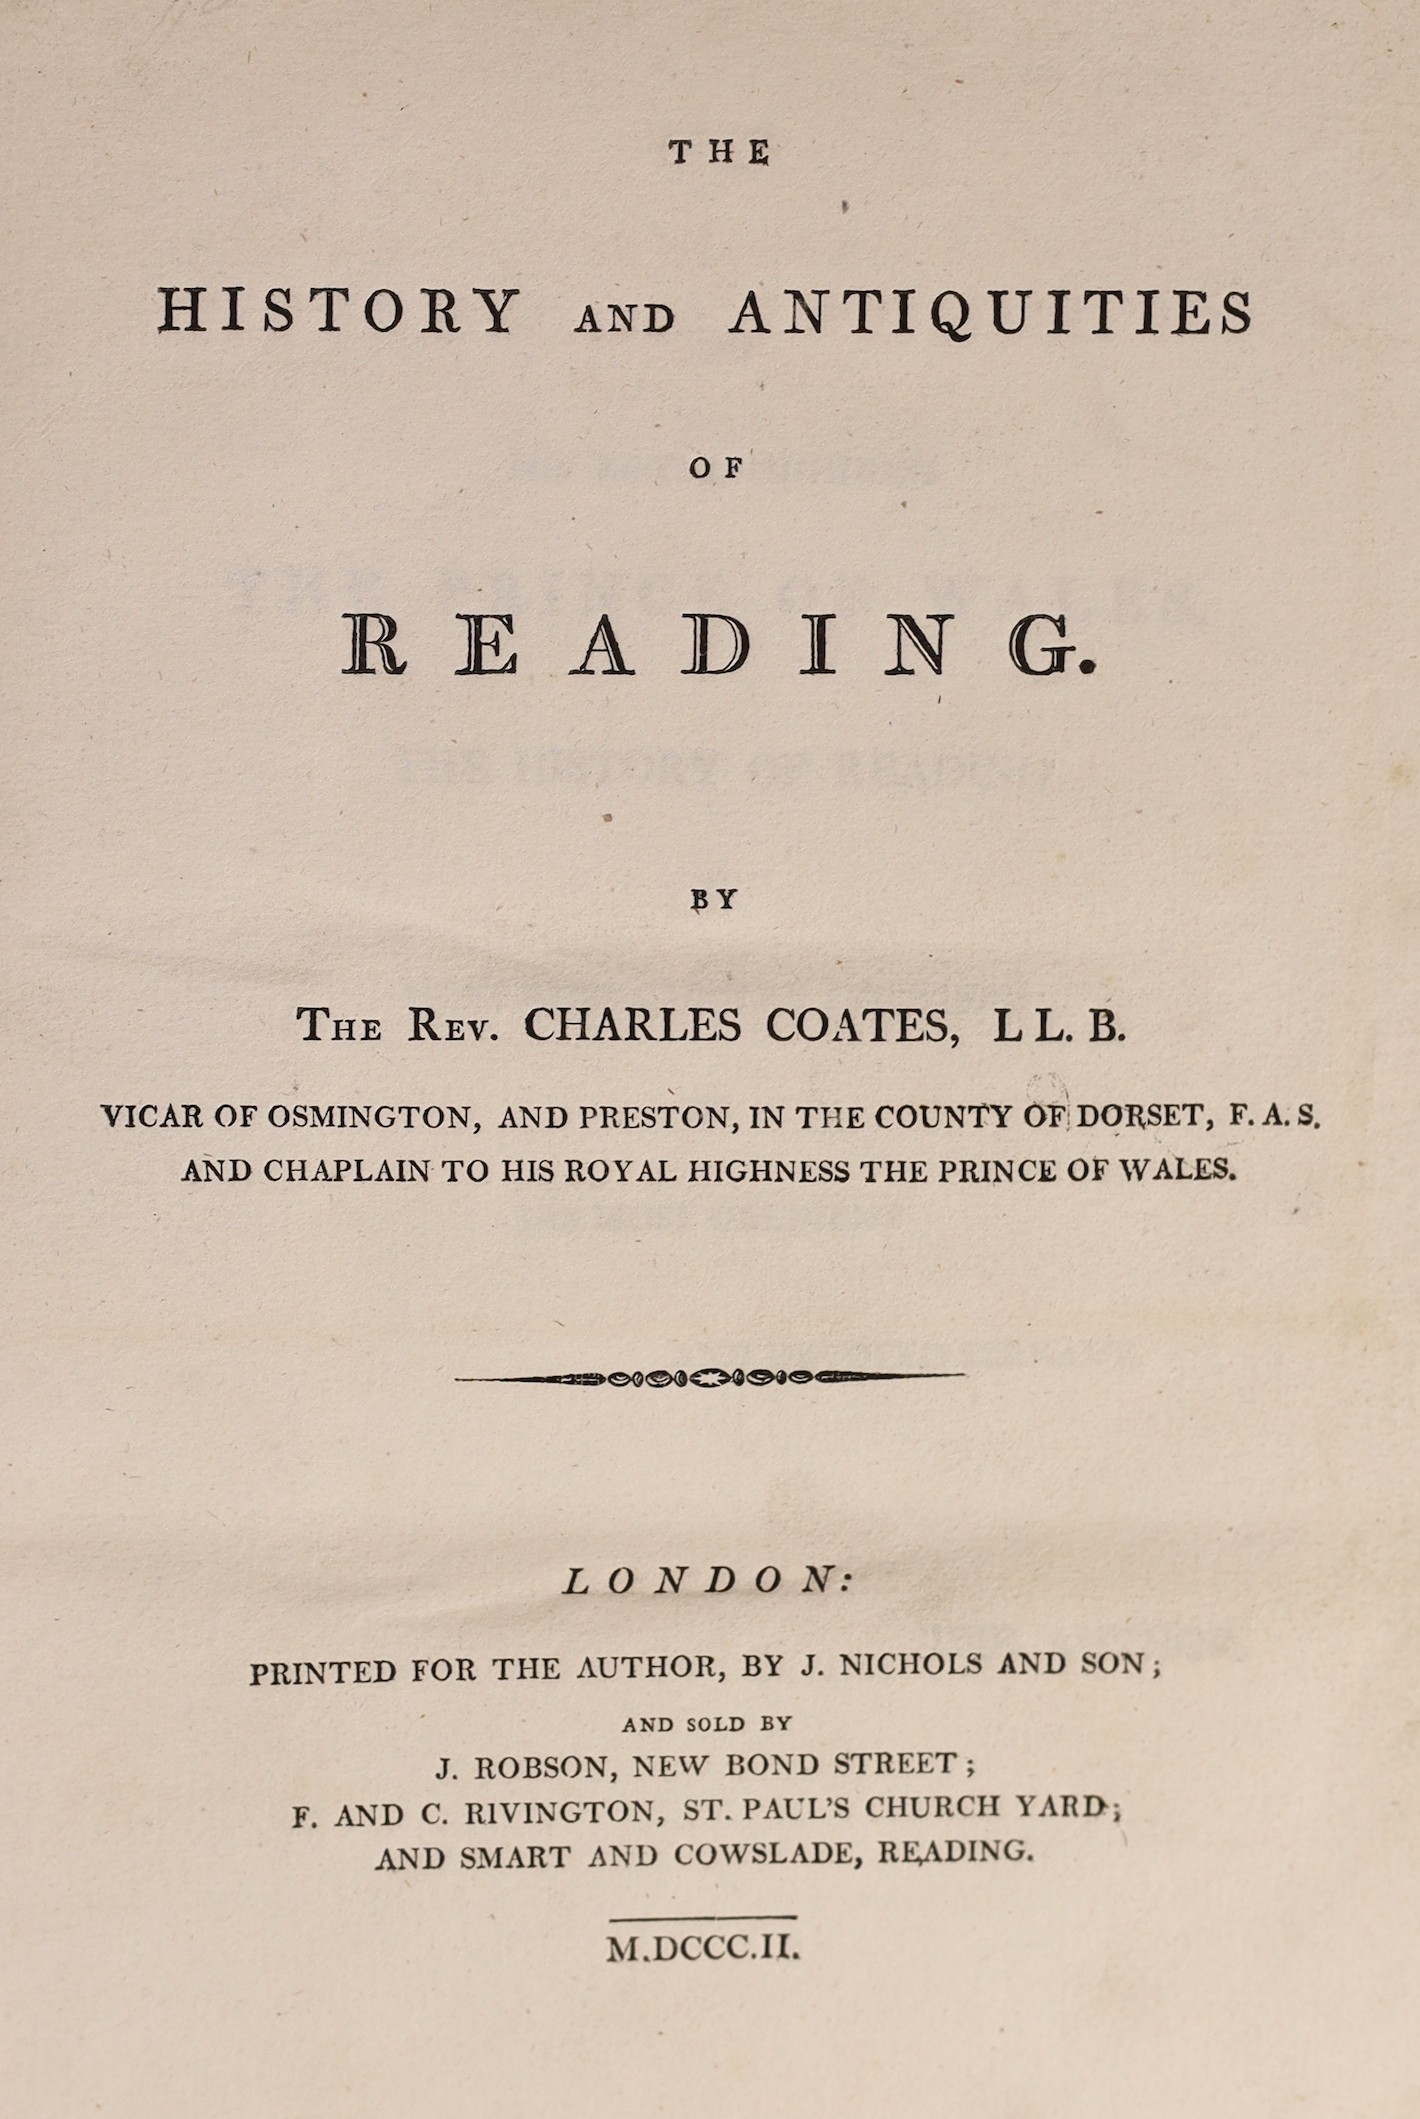 READING - Coates, Charles, Rev. - The History and Antiquities of Reading, 4to, half calf, with folding frontis map and 7 plates (1 of them folding), London, 1802                                                           